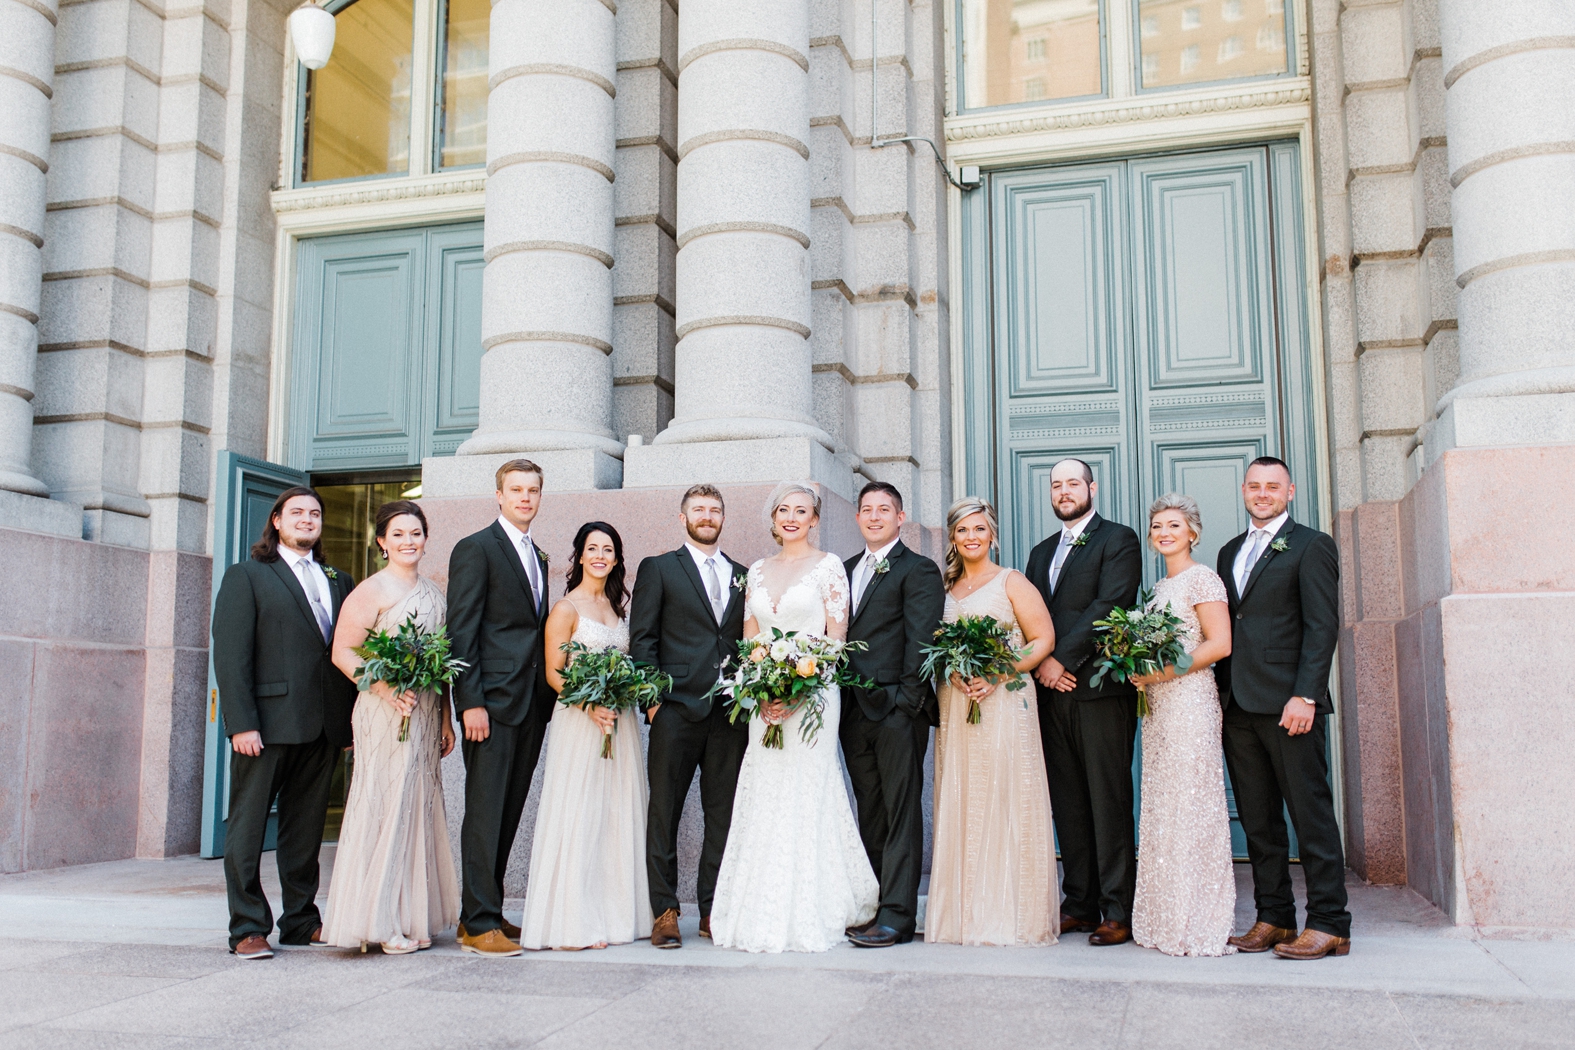 Groomsmen in olive green suits with light gray ties and brown shoes. Bridesmaids in peach, blush, neutral sequined and beaded bridesmaid dresses. Bride in lace long sleeve wedding gown with birdcage veil. Greenery and peach bouquets.